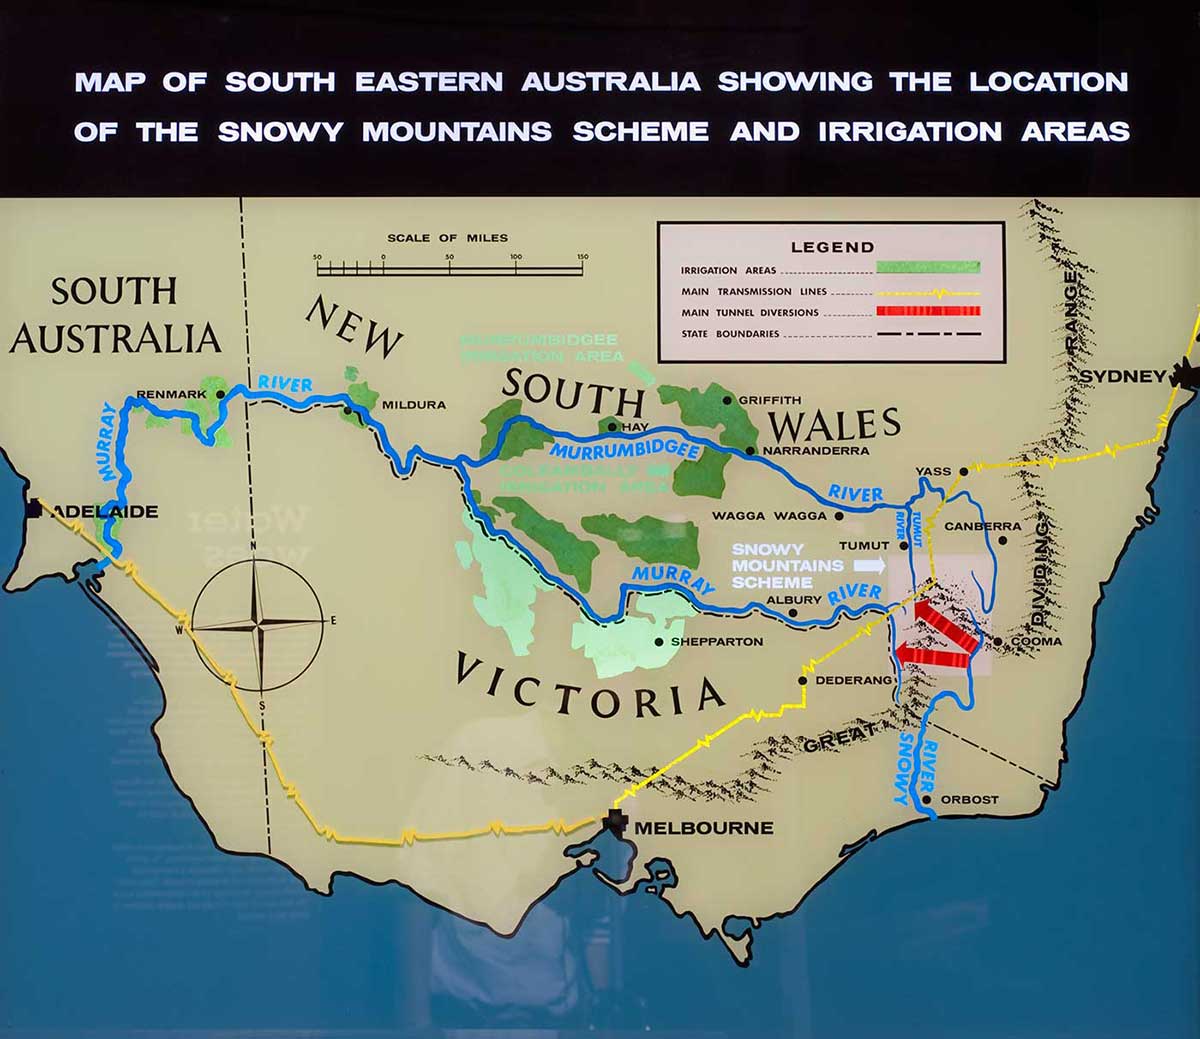 A lightbox depicting key locations in the Snowy Mountains Hydro-Electric Scheme - click to view larger image